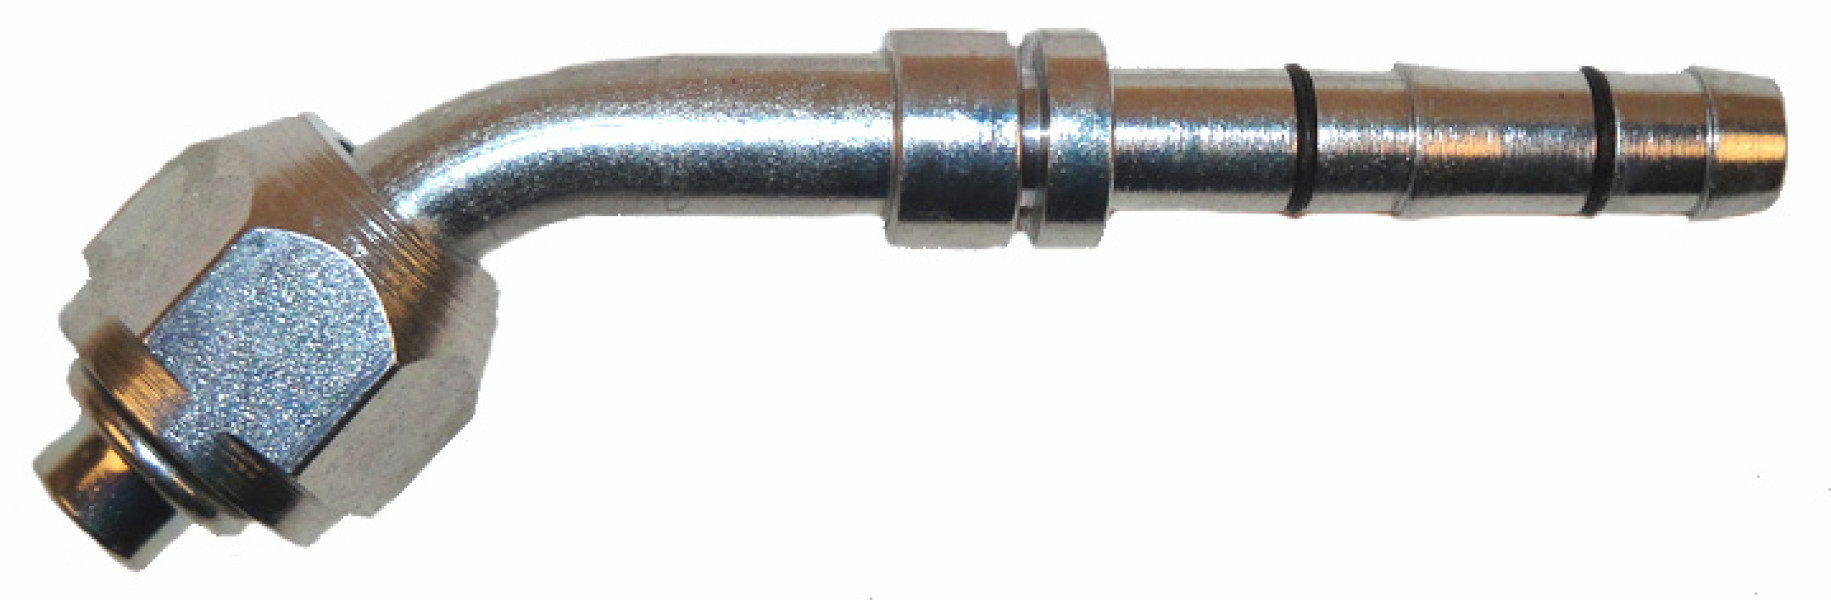 Image of A/C Refrigerant Hose Fitting from Sunair. Part number: FJ3055-01-0606S